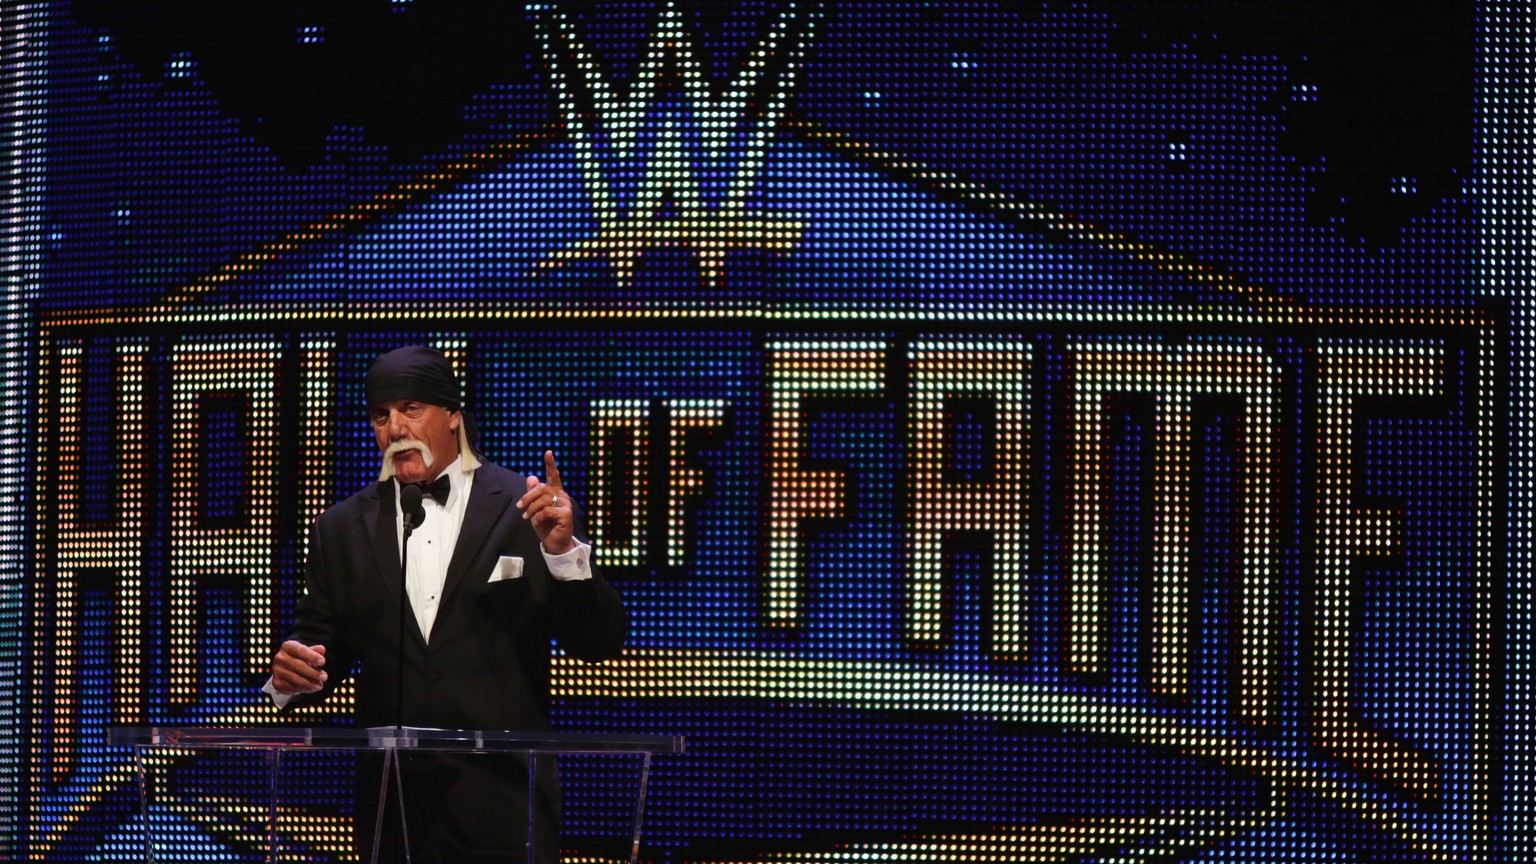 IMAGE DISTRIBUTED FOR WWE - Professional wrestling superstar Hulk Hogan inducts the late Randy &quot;Macho Man&quot; Savage&quot; at the WWE Hall of Fame Ceremony, on Saturday, March 28, 2015 in San J ...